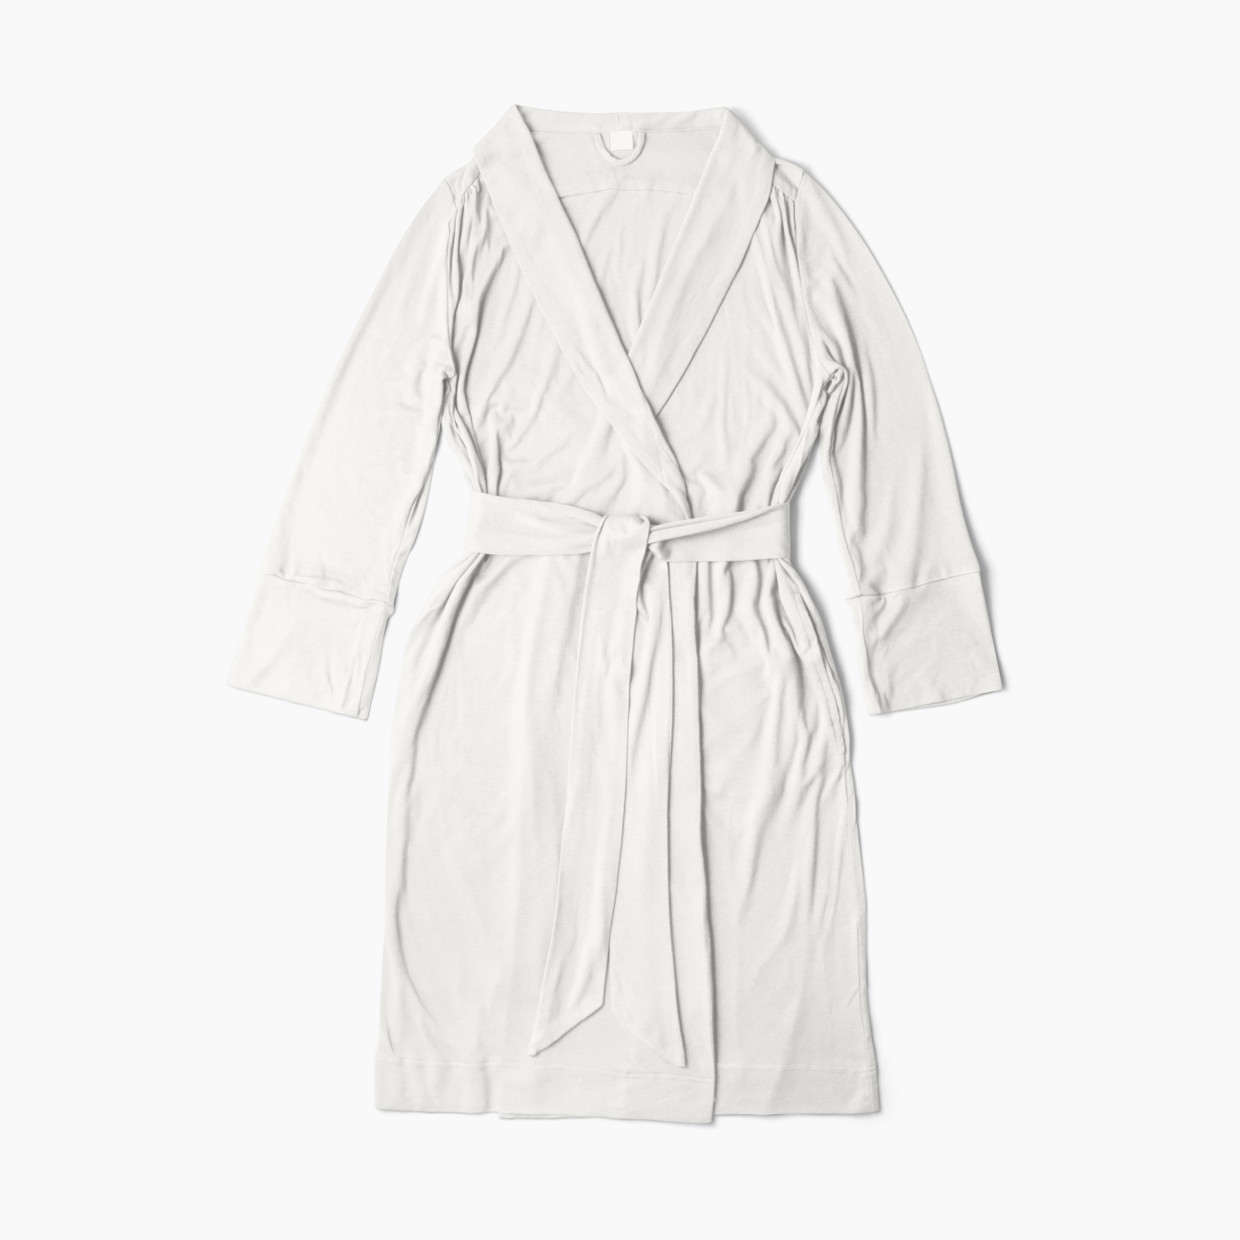 Goumi Kids You'll Live In Mom Robe - Cloud, X-Large/Xx-Large.